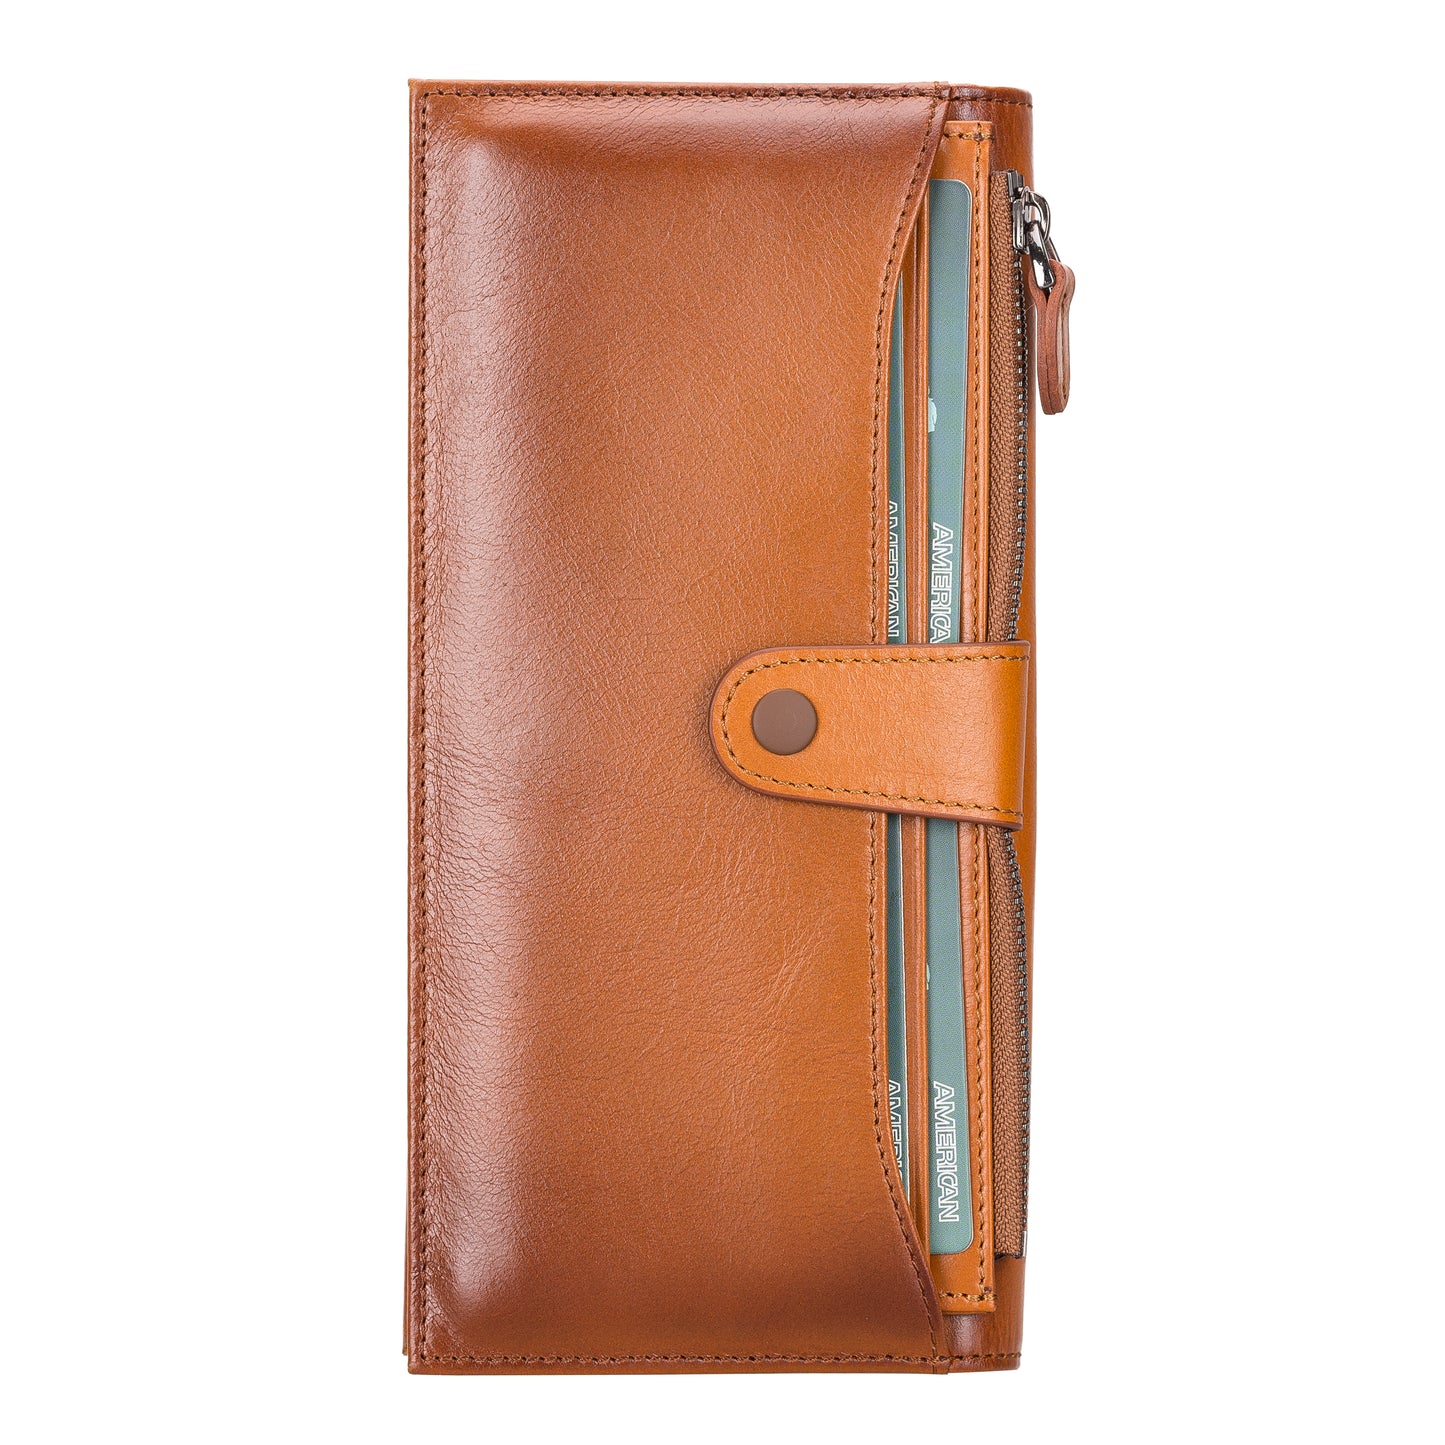 Creed Leather Men Wallet - Rustic Brown